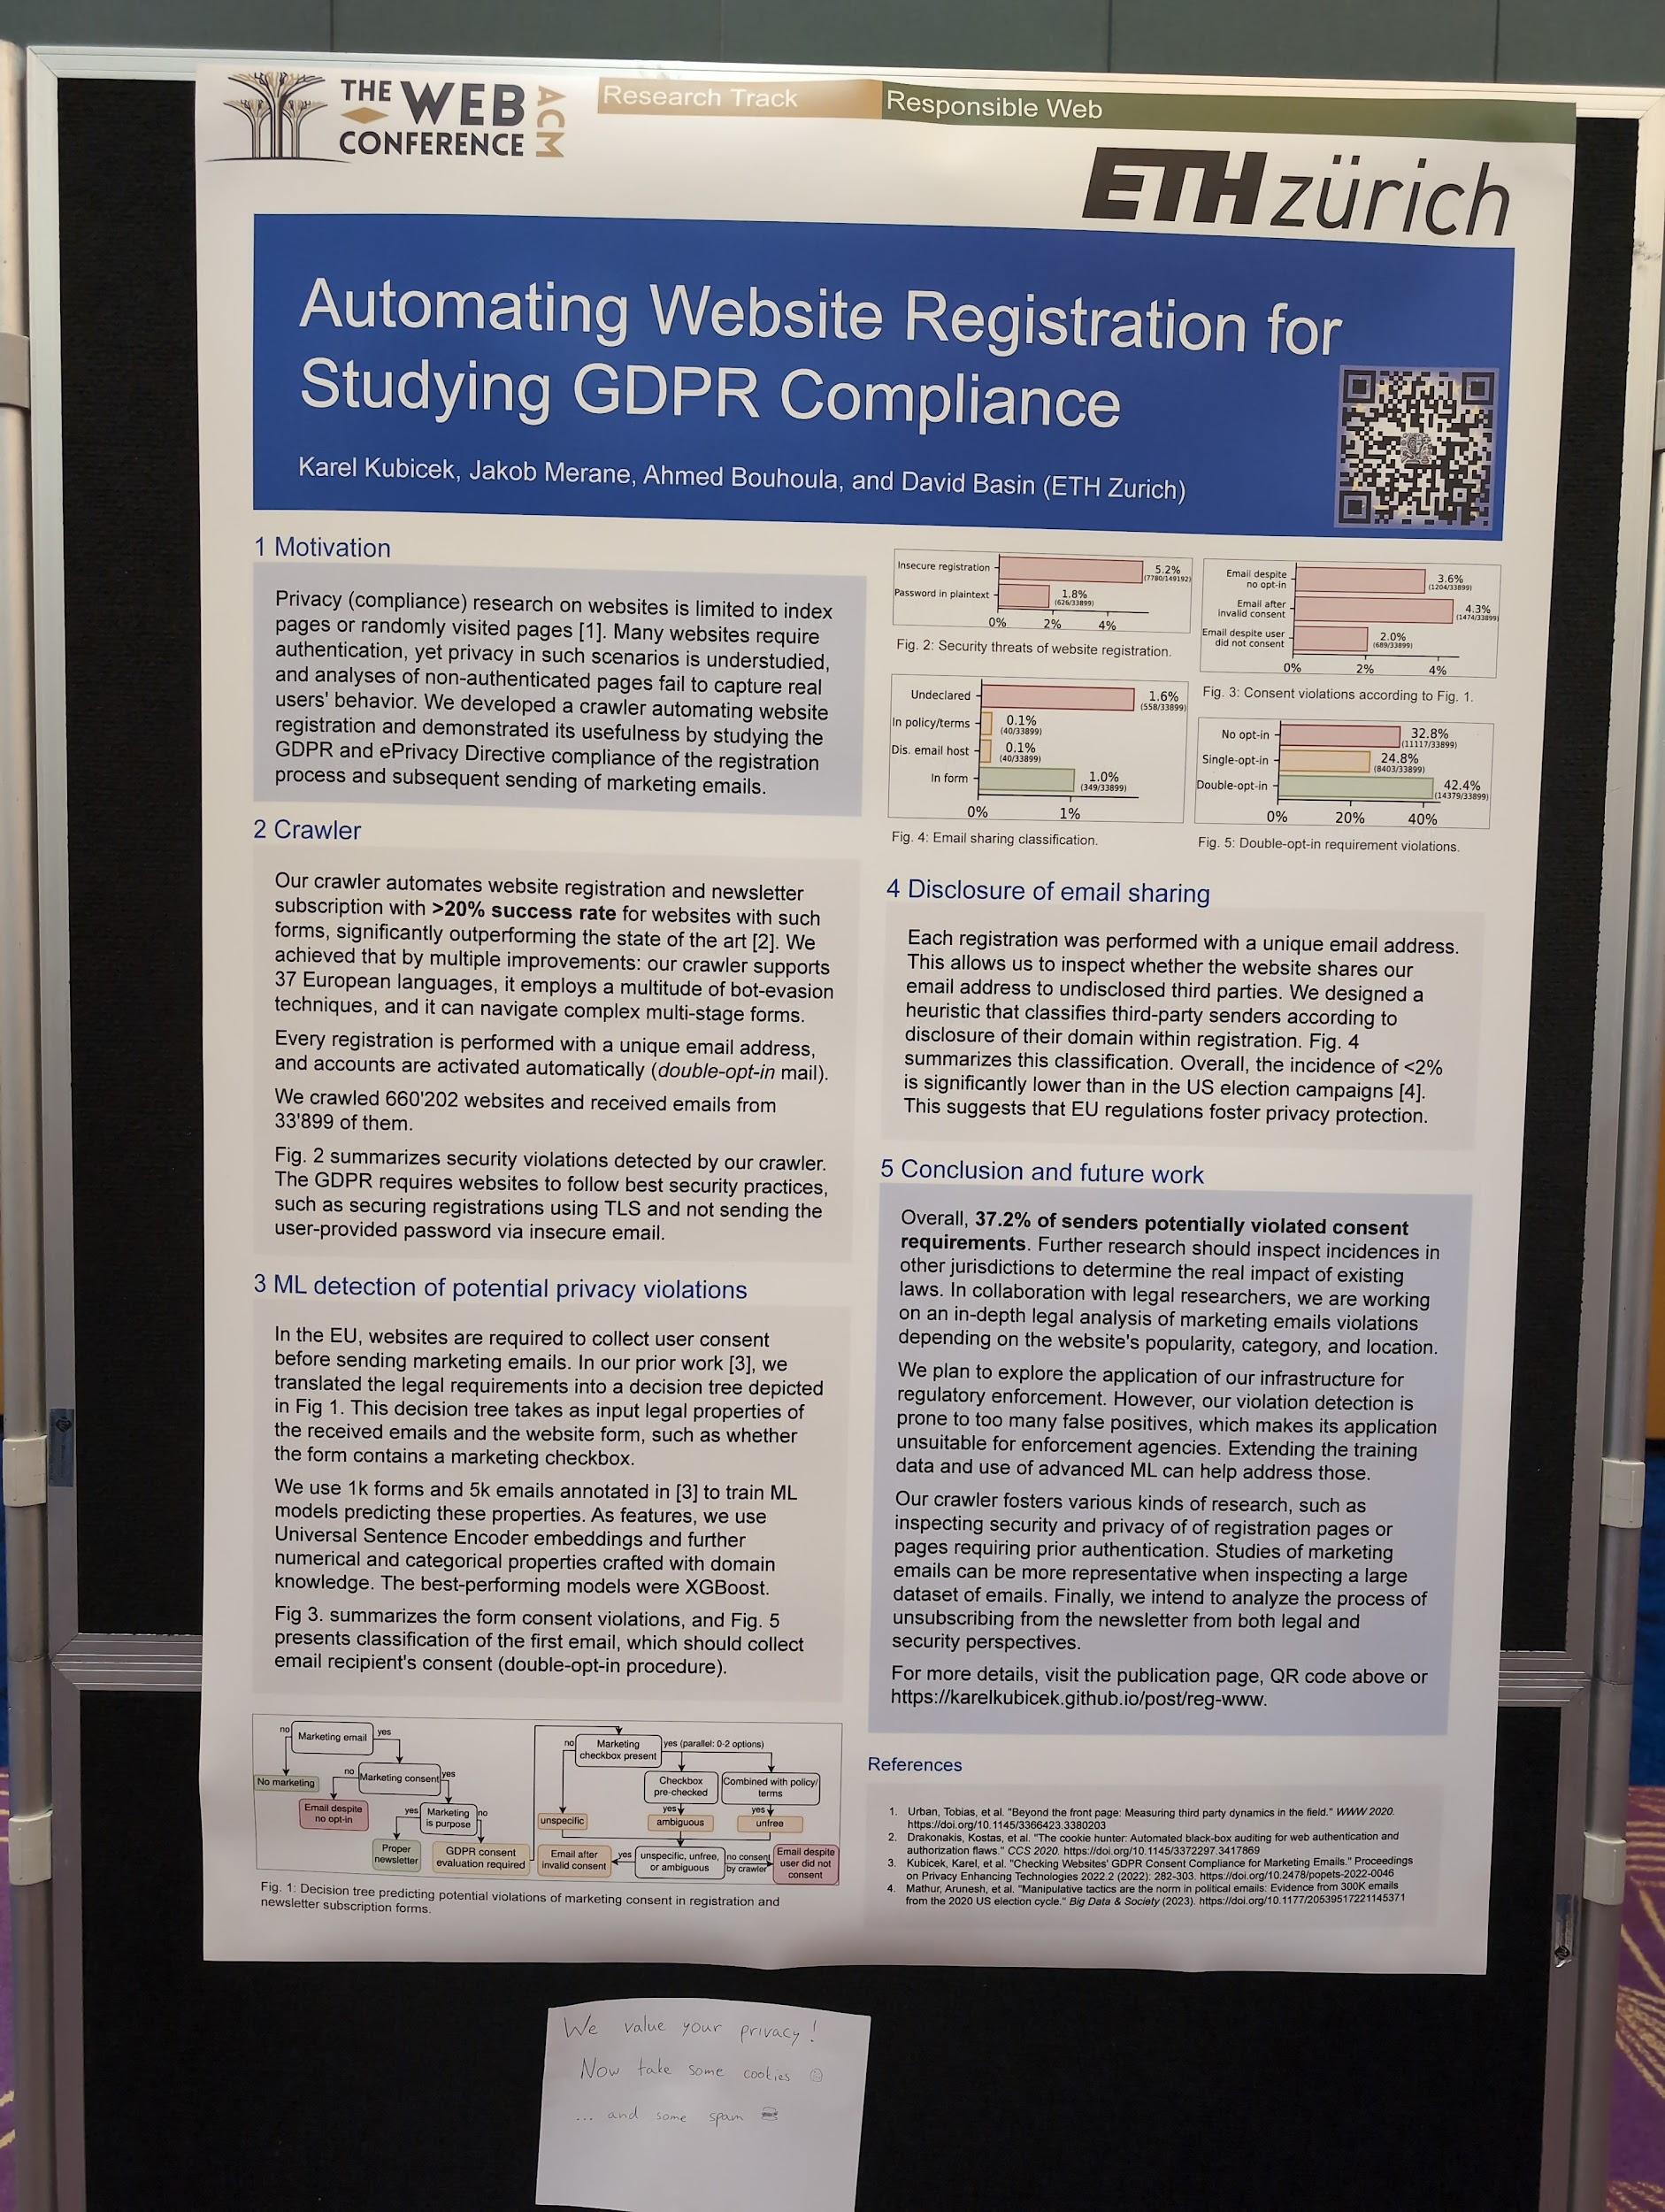 Poster for the 'Automating Website Registration for Studying GDPR Compliance' paper.